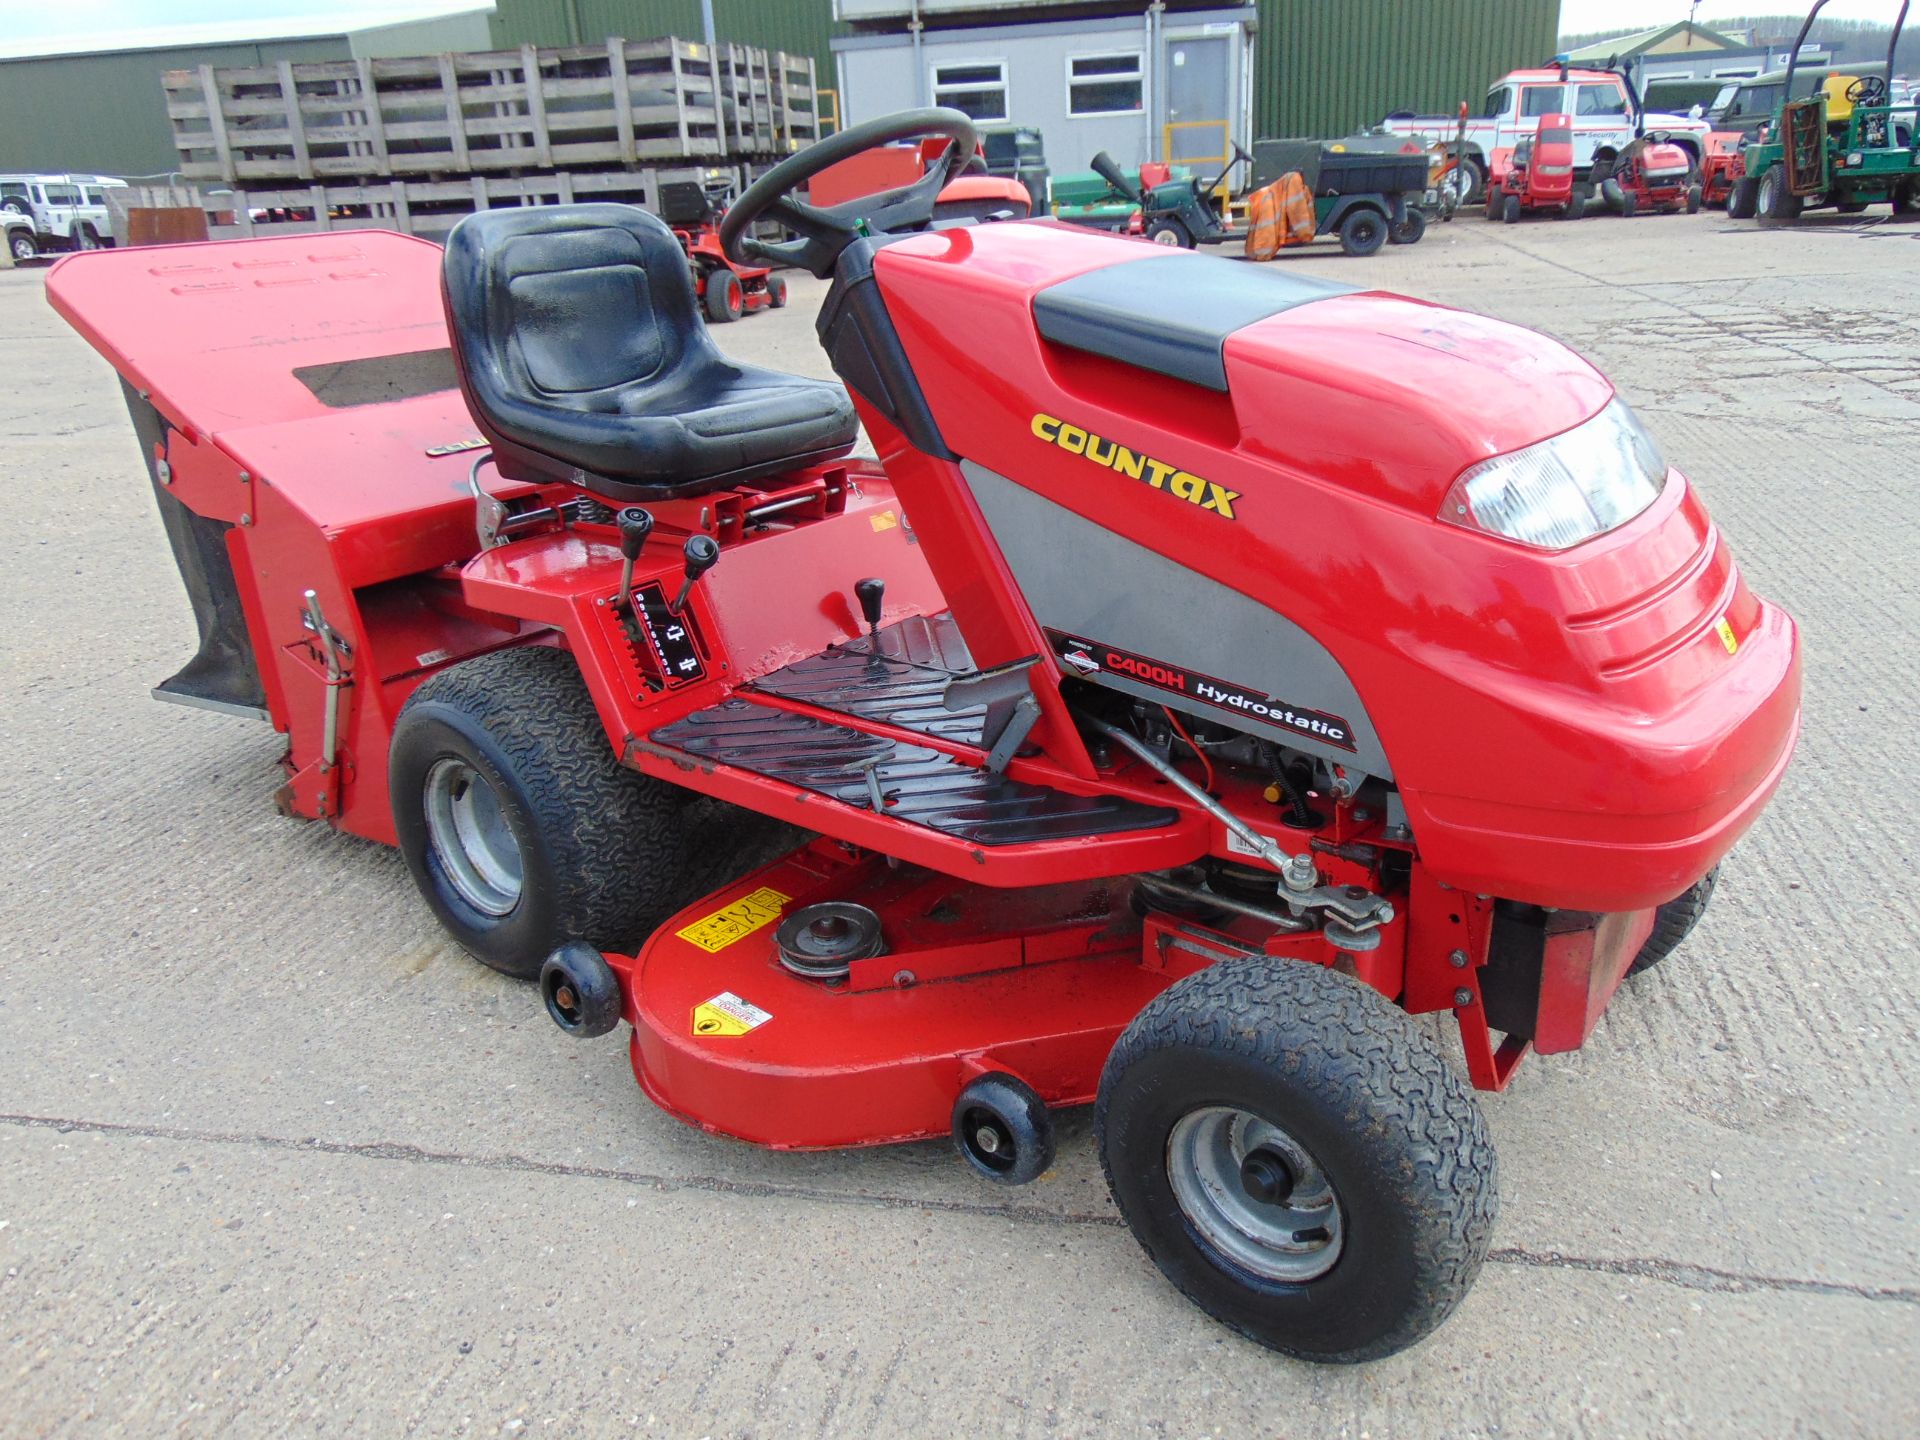 Countax C400H Ride On Mower / Lawn Tractor